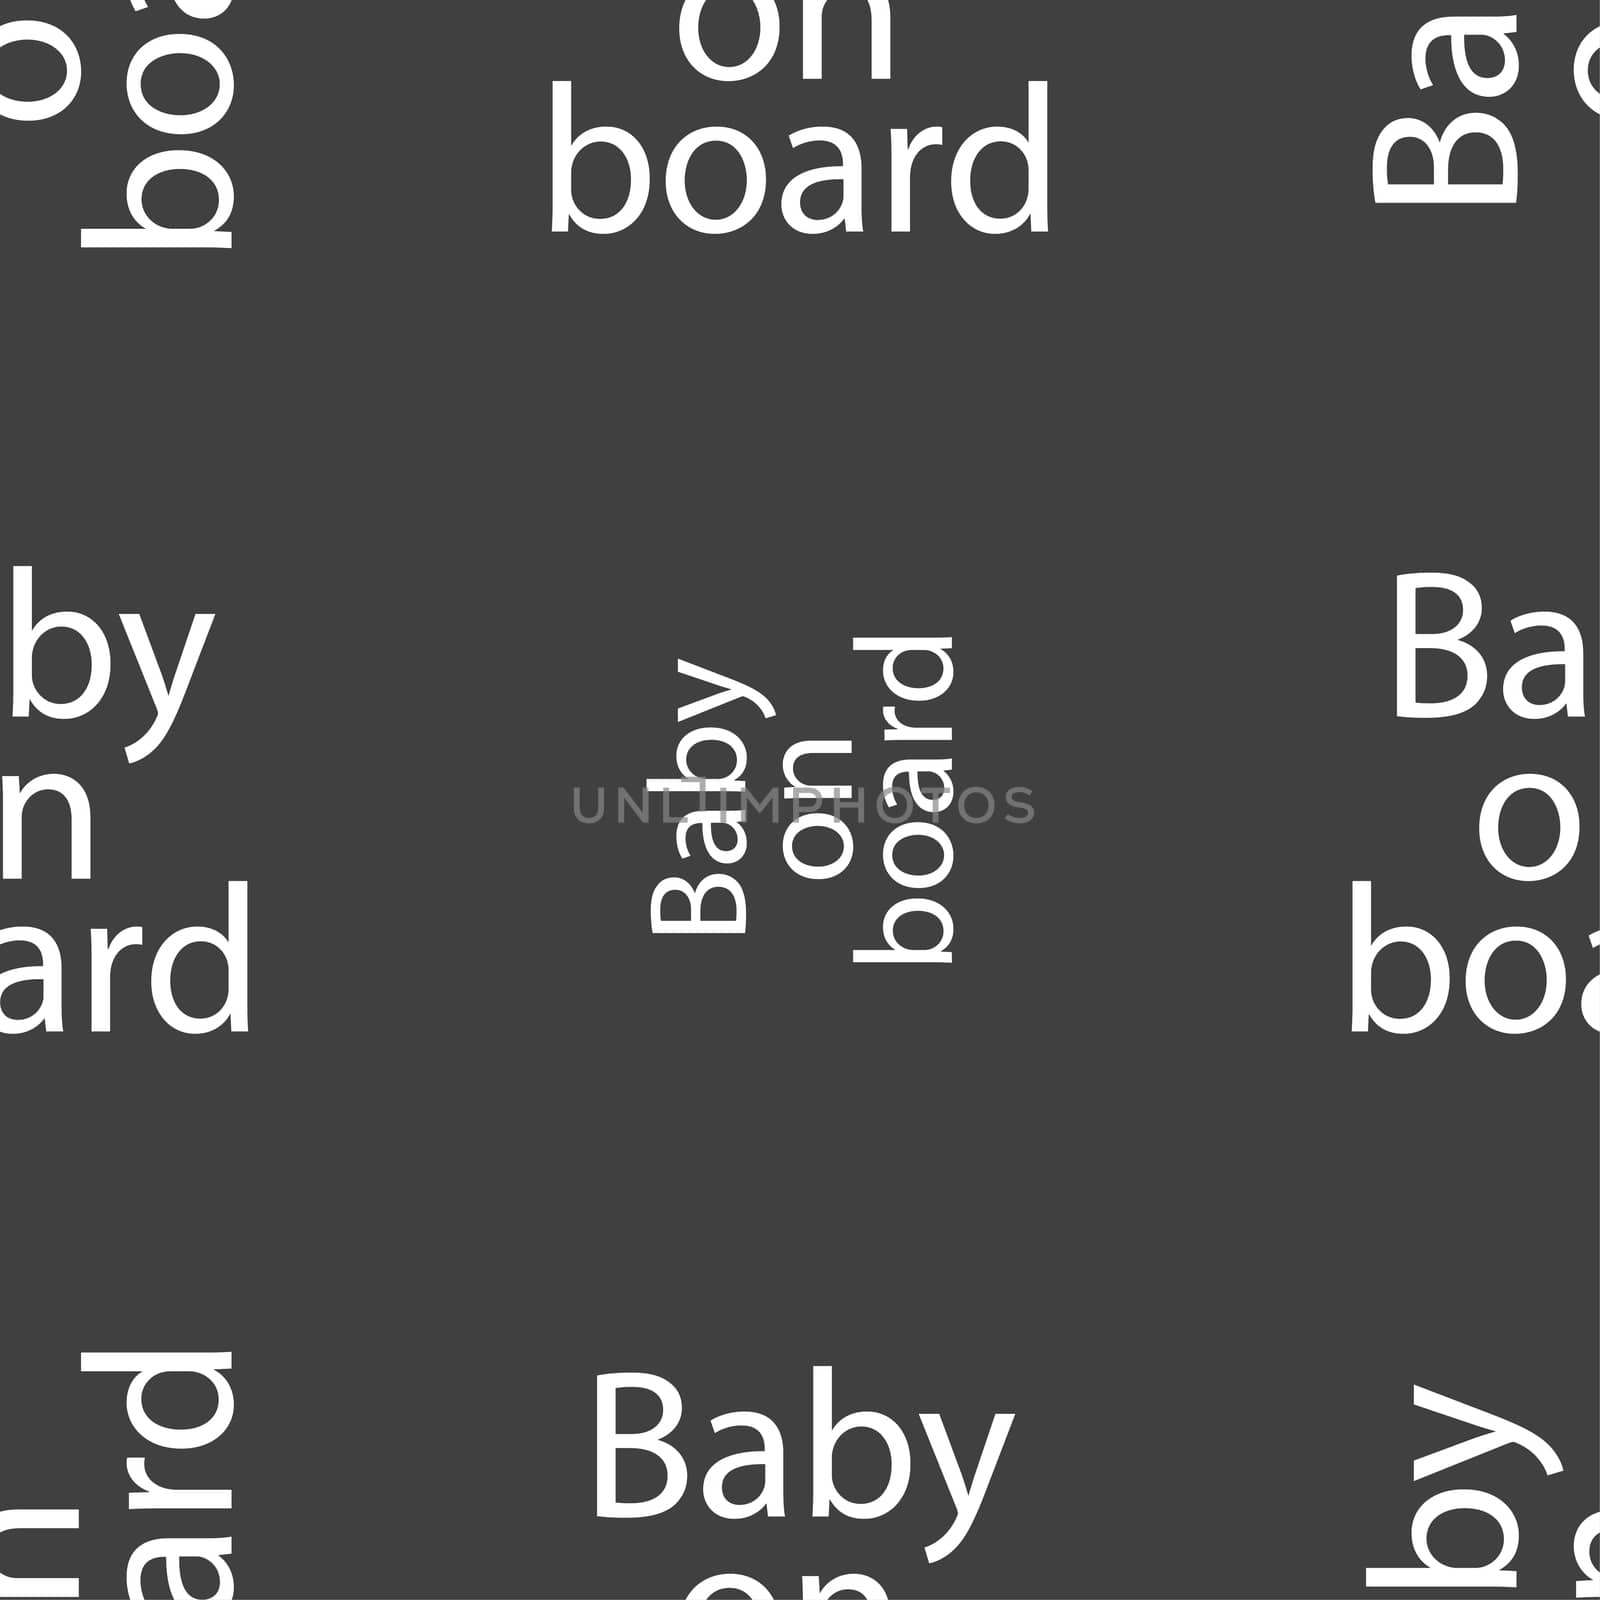 Baby on board sign icon. Infant in car caution symbol. Seamless pattern on a gray background. illustration